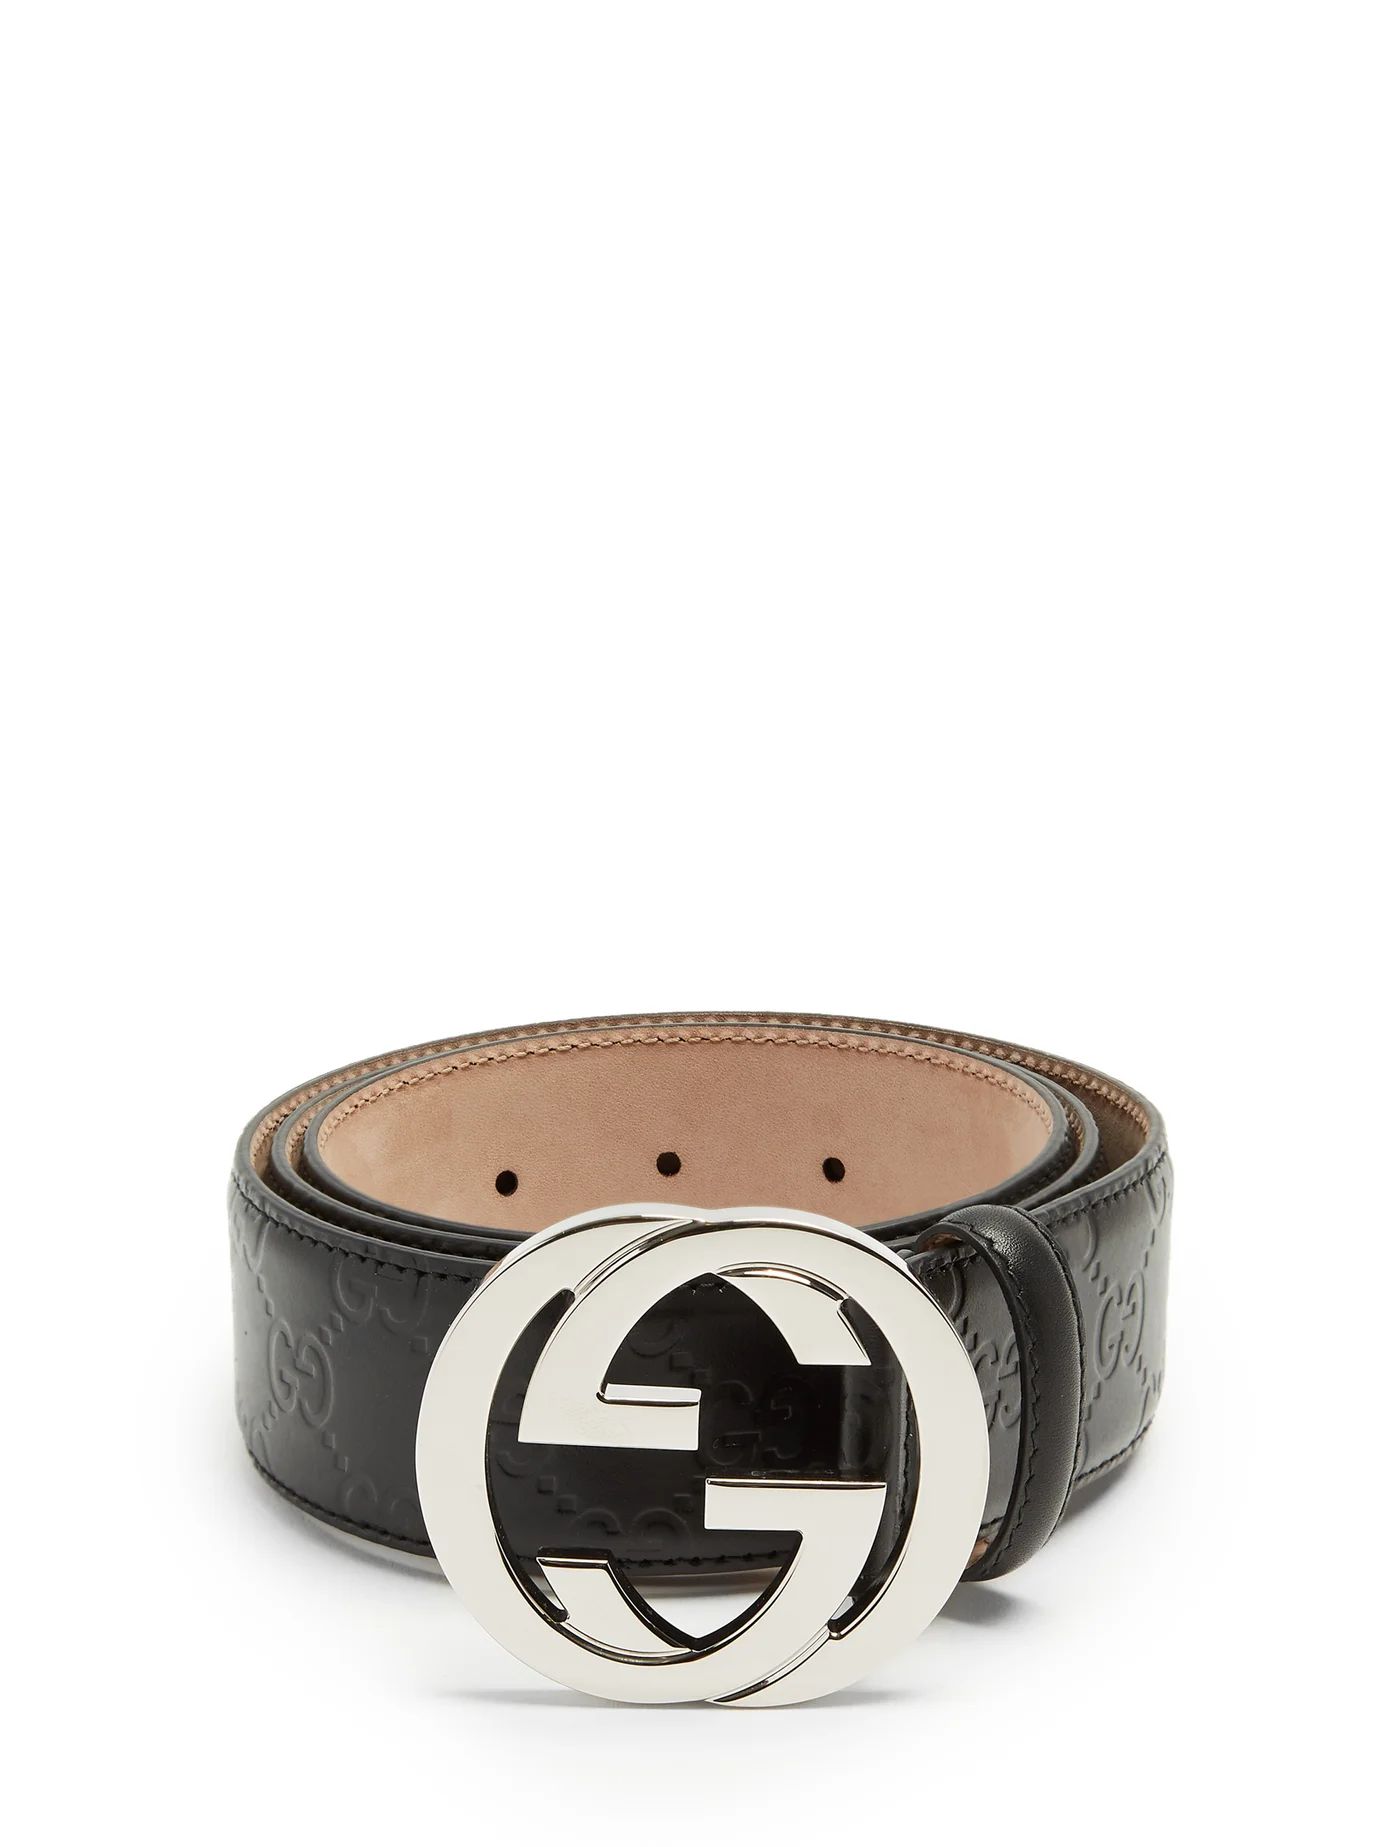 GG-buckle leather belt | Matches (US)